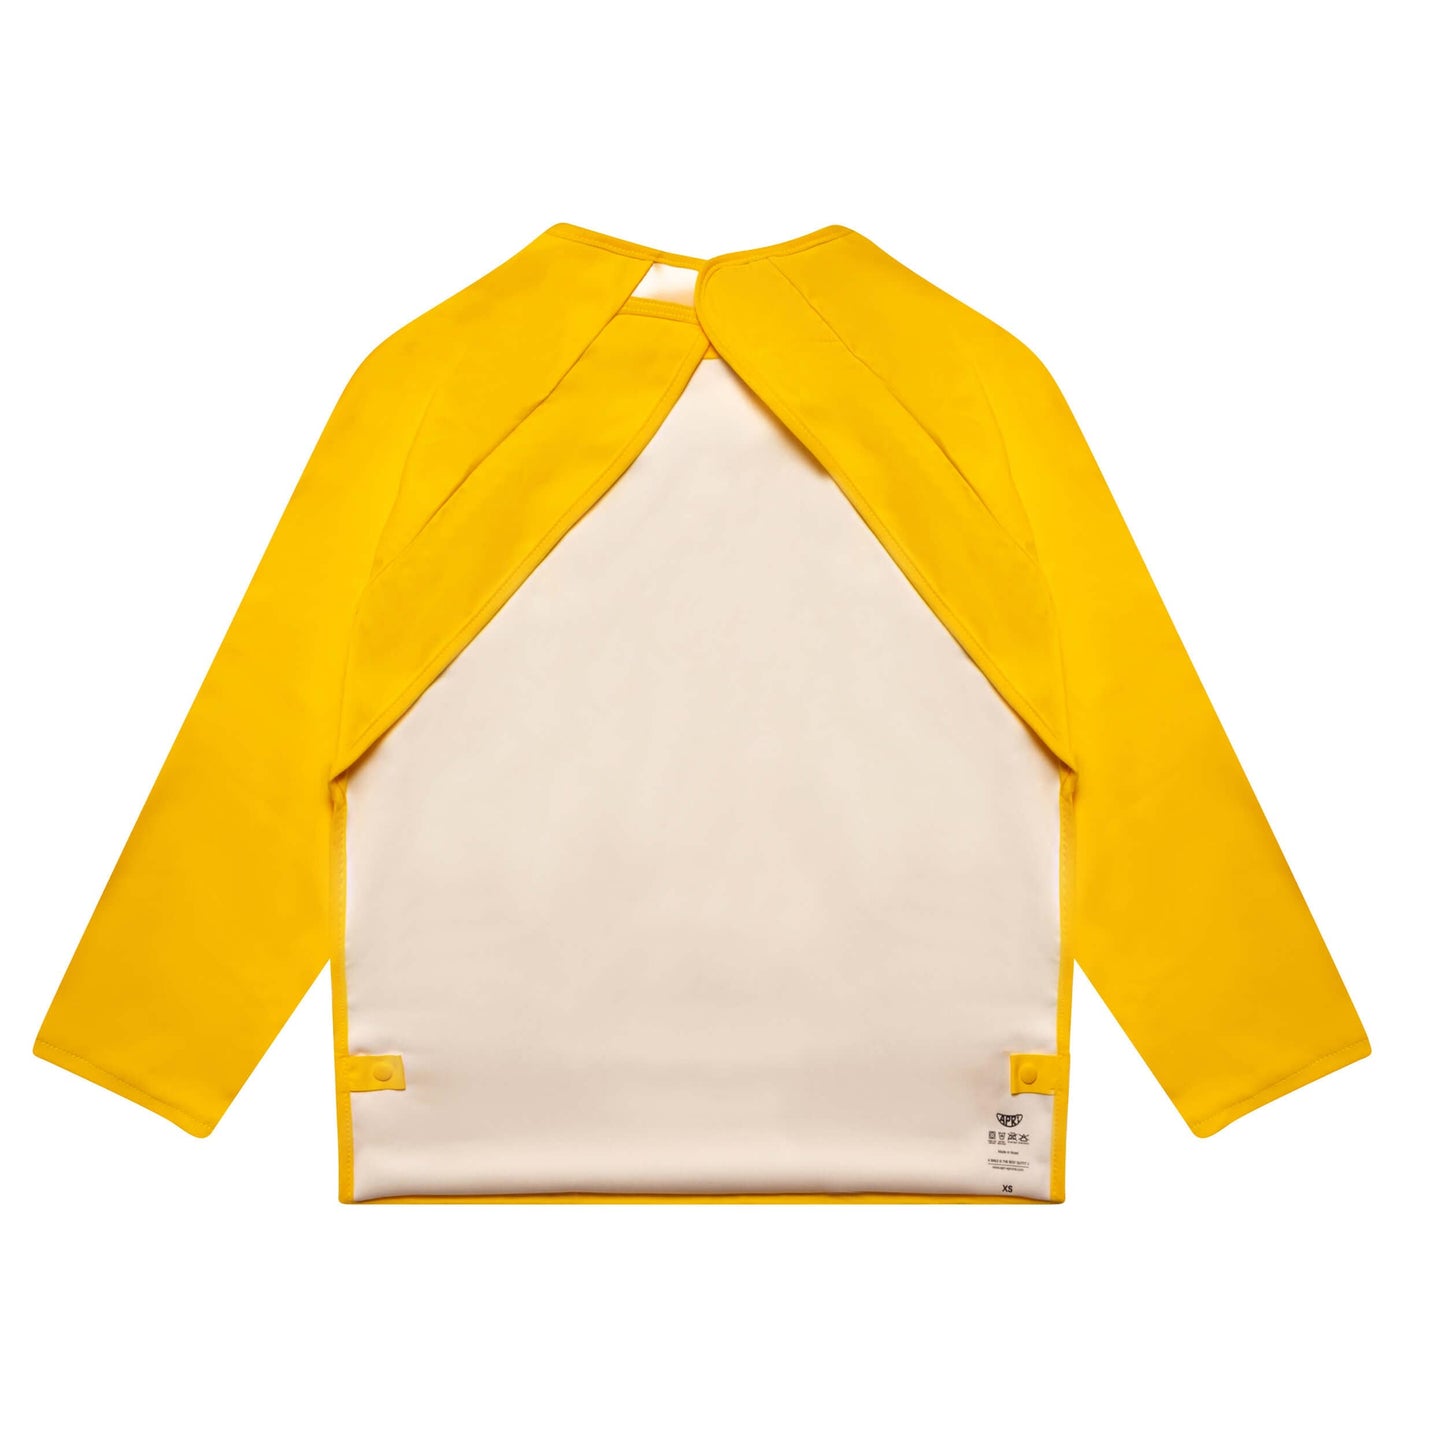 Waterproof bib for kids, teens, and adults with disabilities. Sunshine yellow, long-sleeves with washable fastener by Apri. 